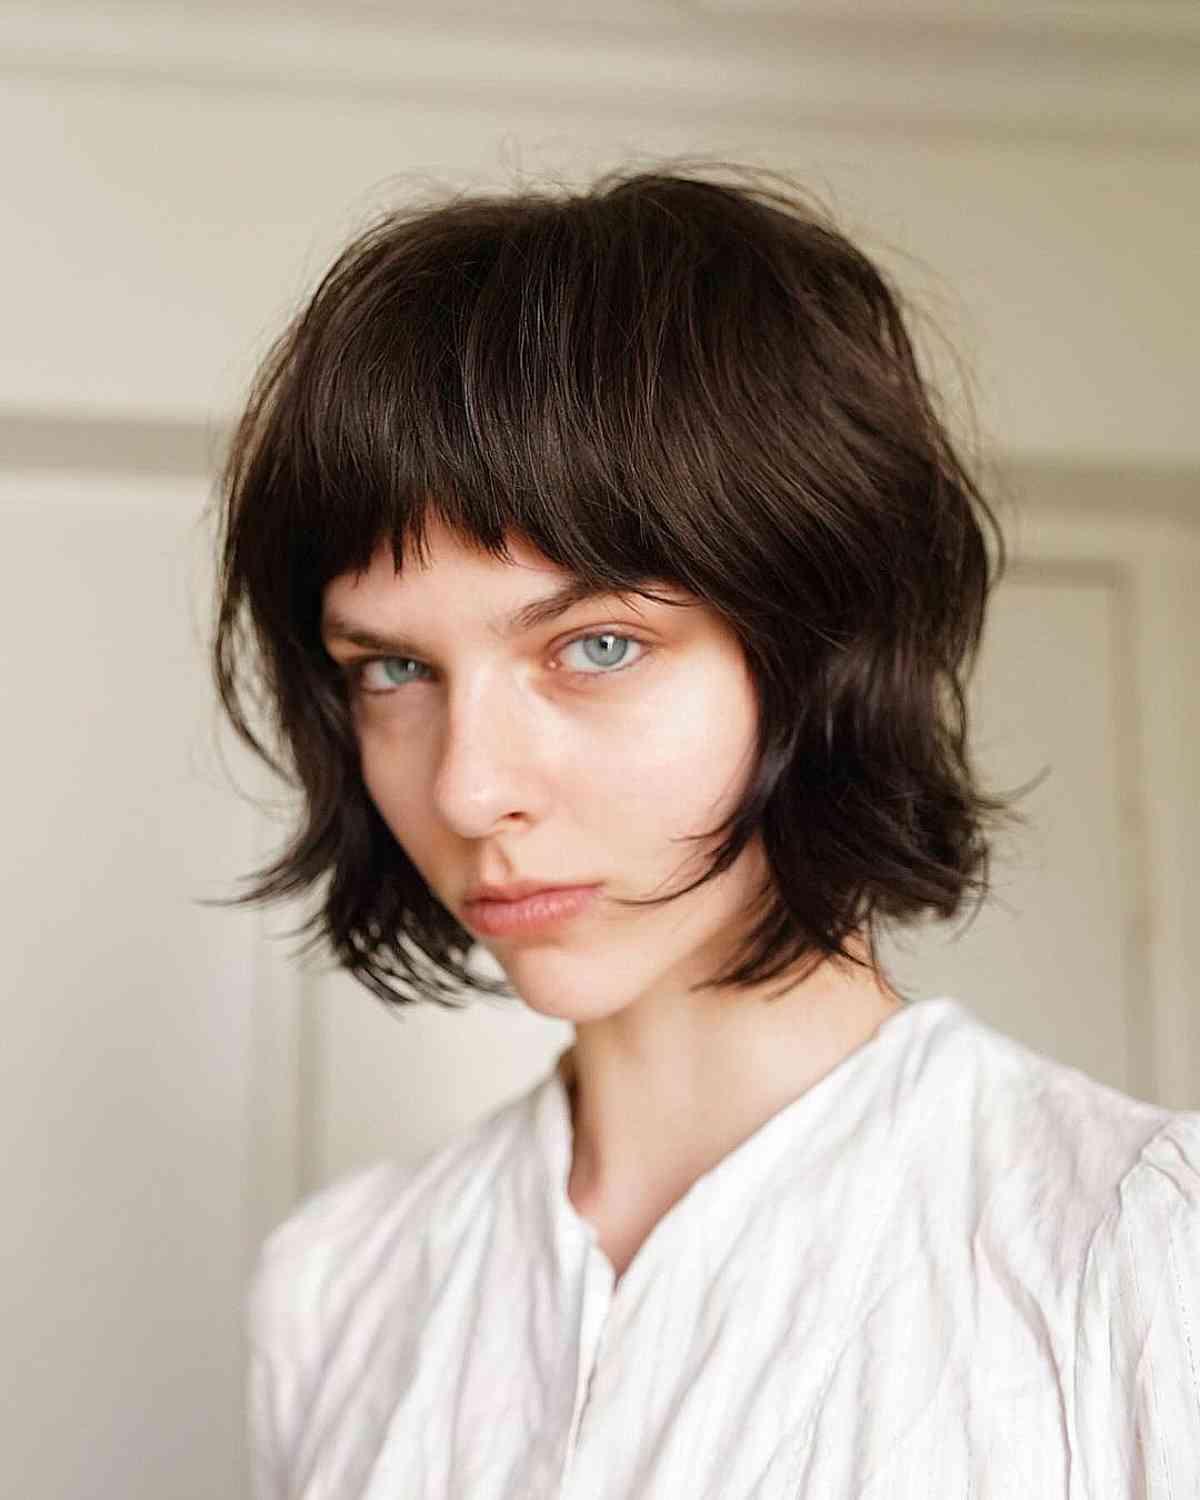 Choppy bob gender neutral haircut with micro bangs and textured layers